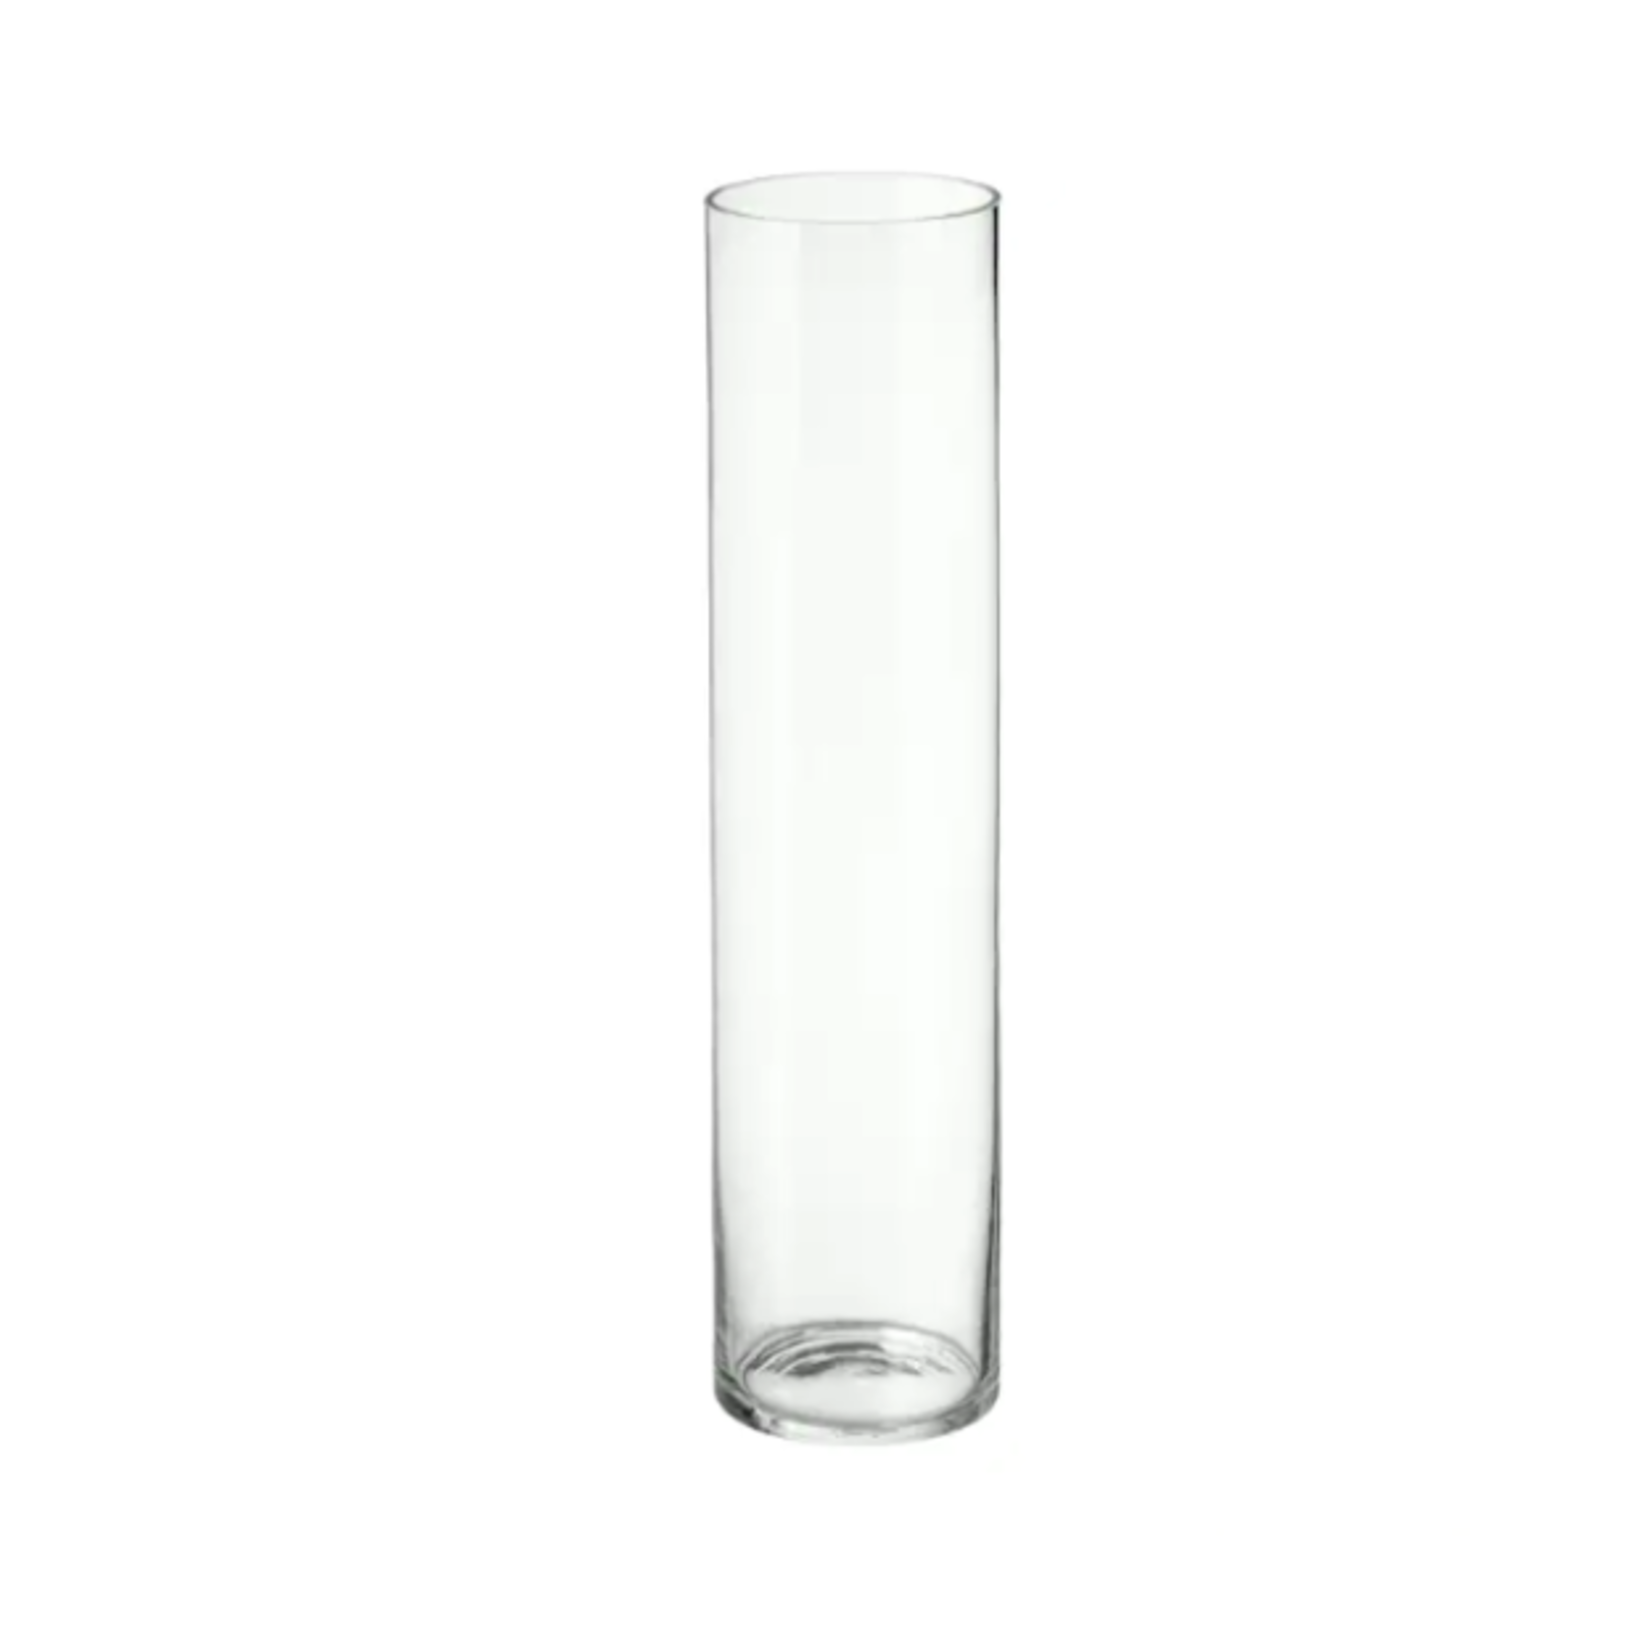 40"H X 8" CLEAR GLASS CYLINDER VASE